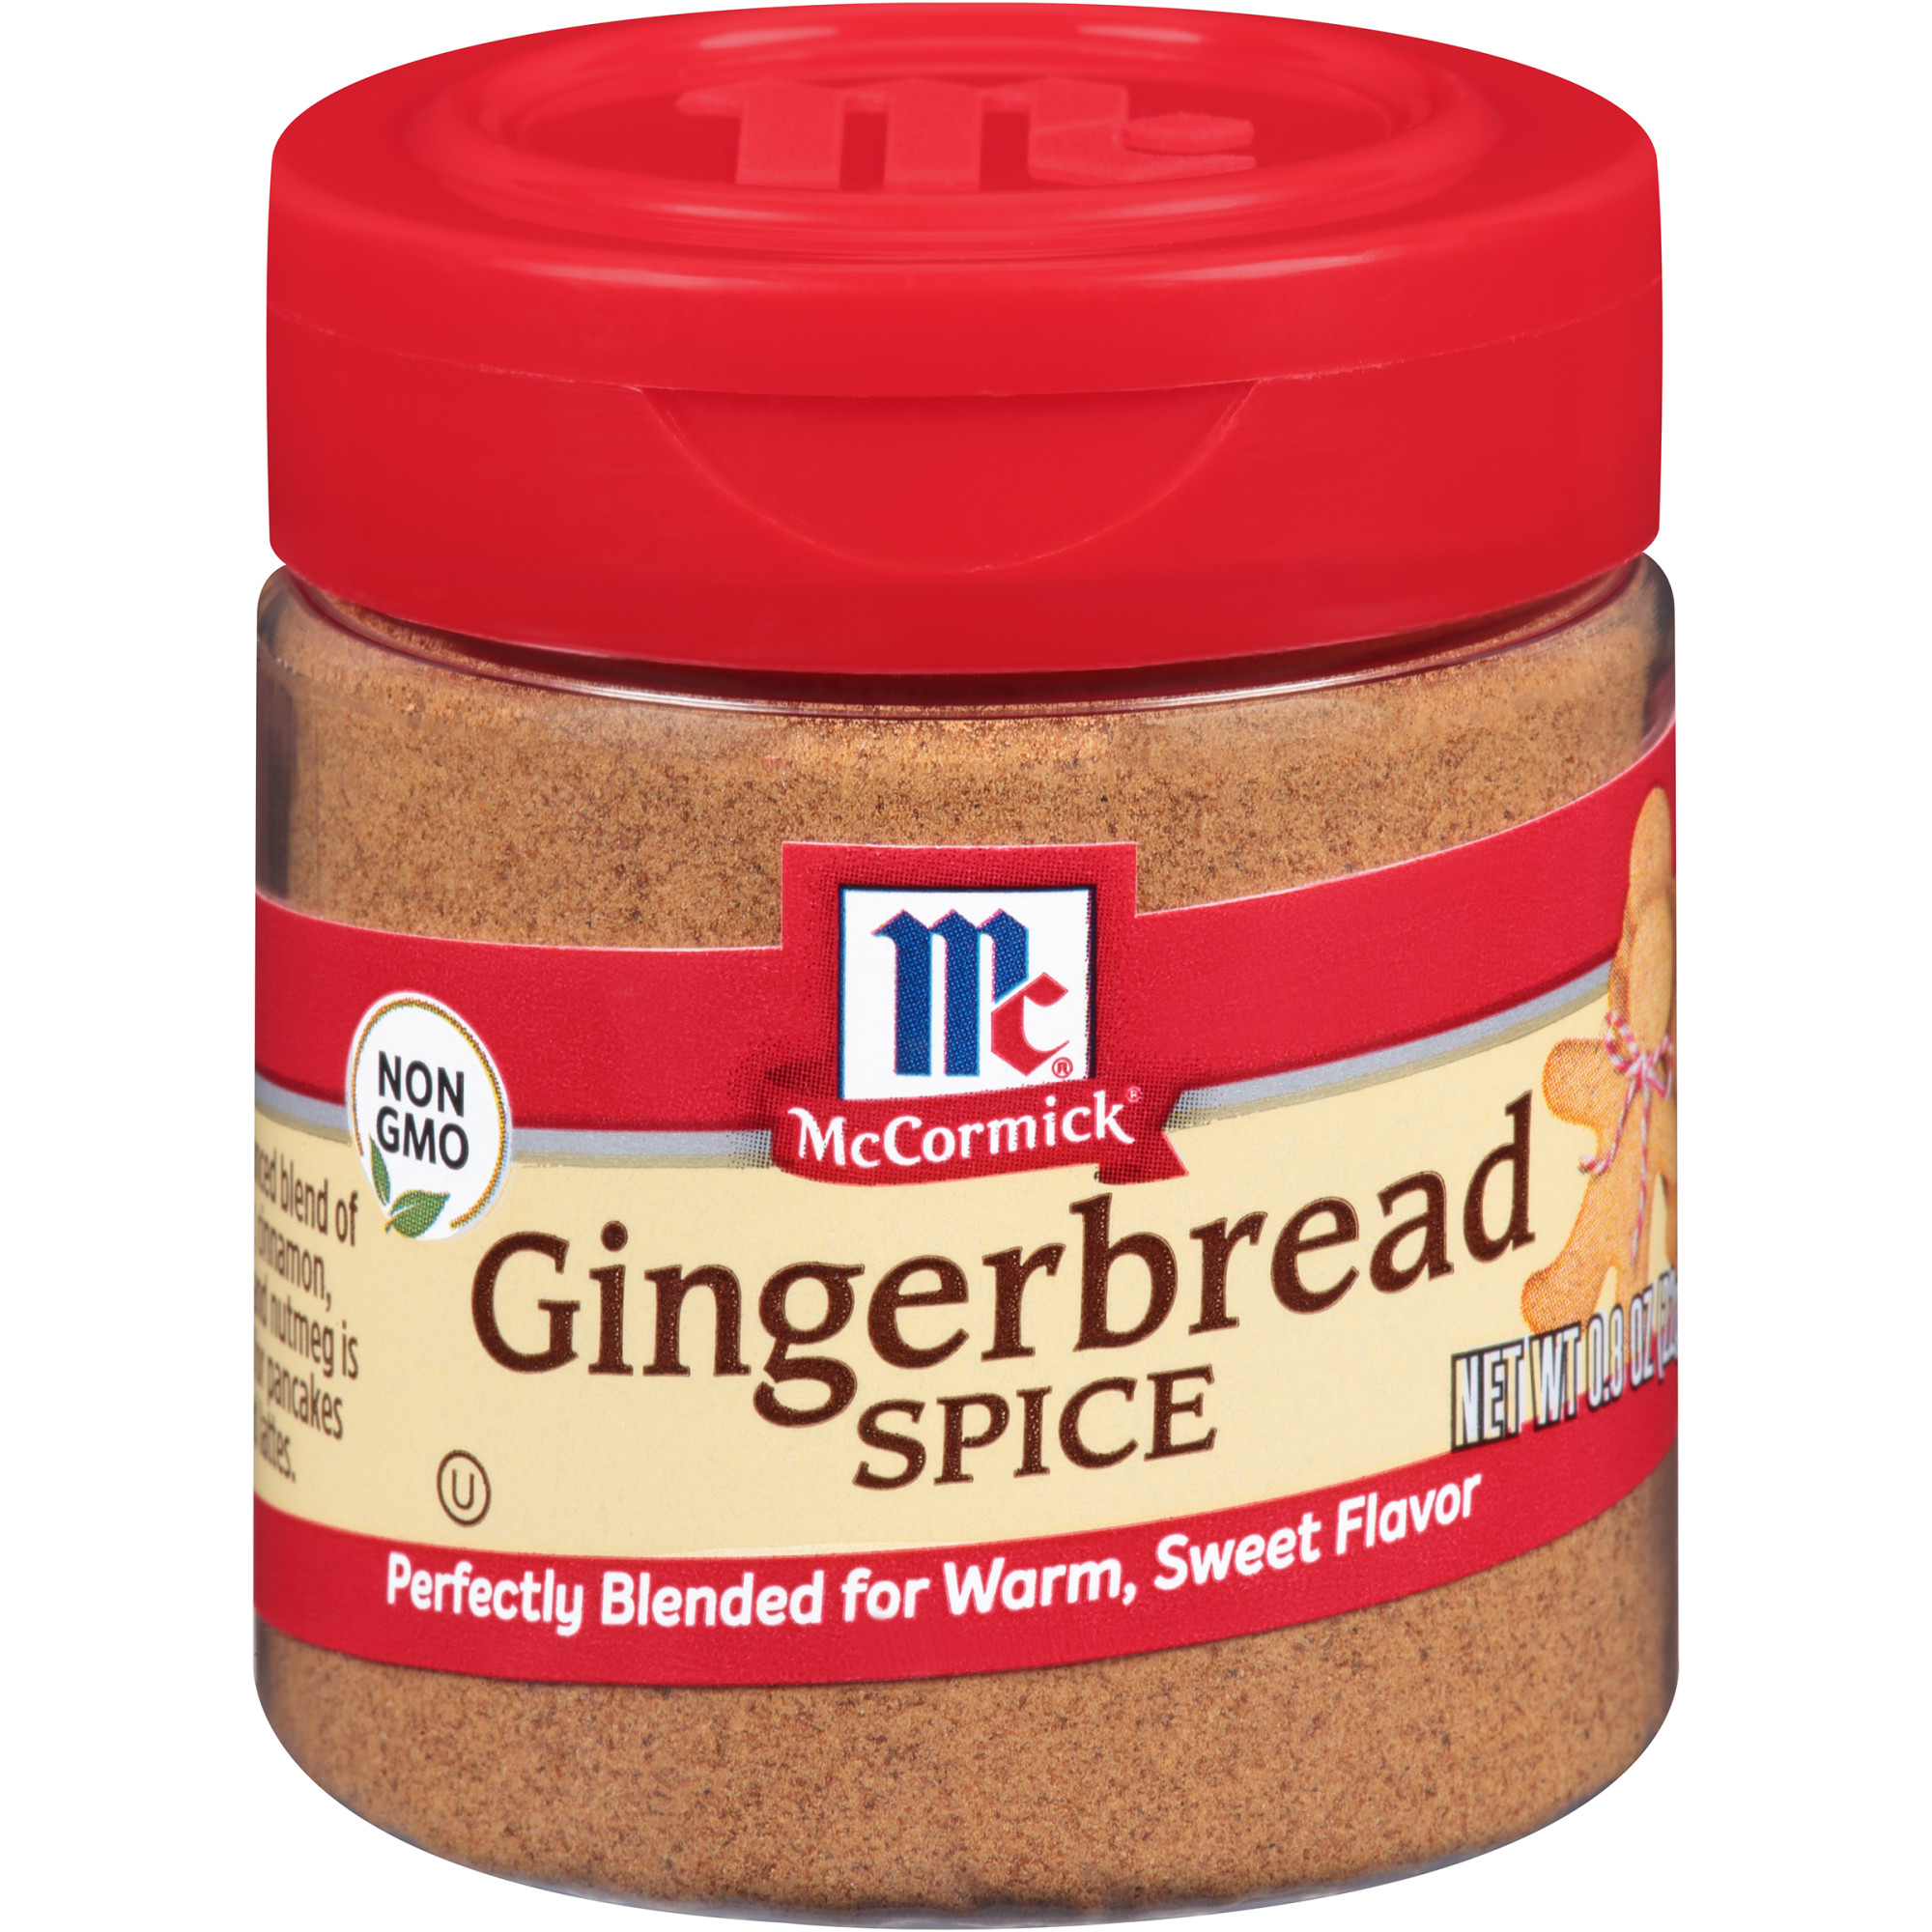 McCormick Gingerbread Spice, 0.8 oz - image 1 of 10